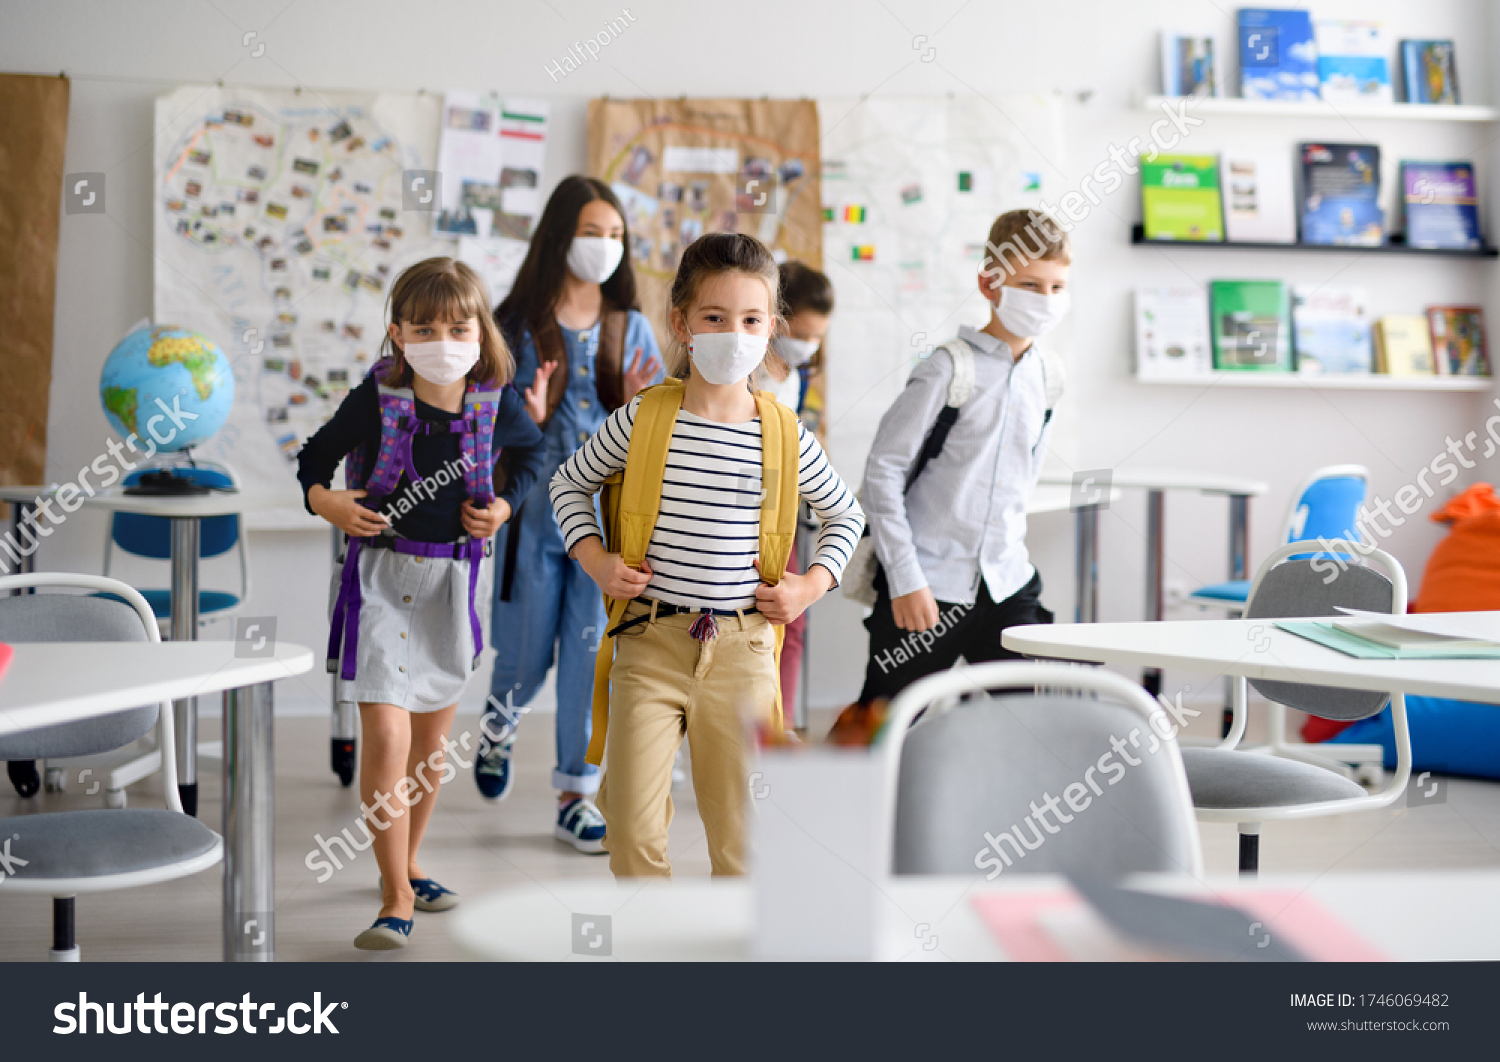 Group of children with face mask back at school after covid-19 quarantine and lockdown. #1746069482